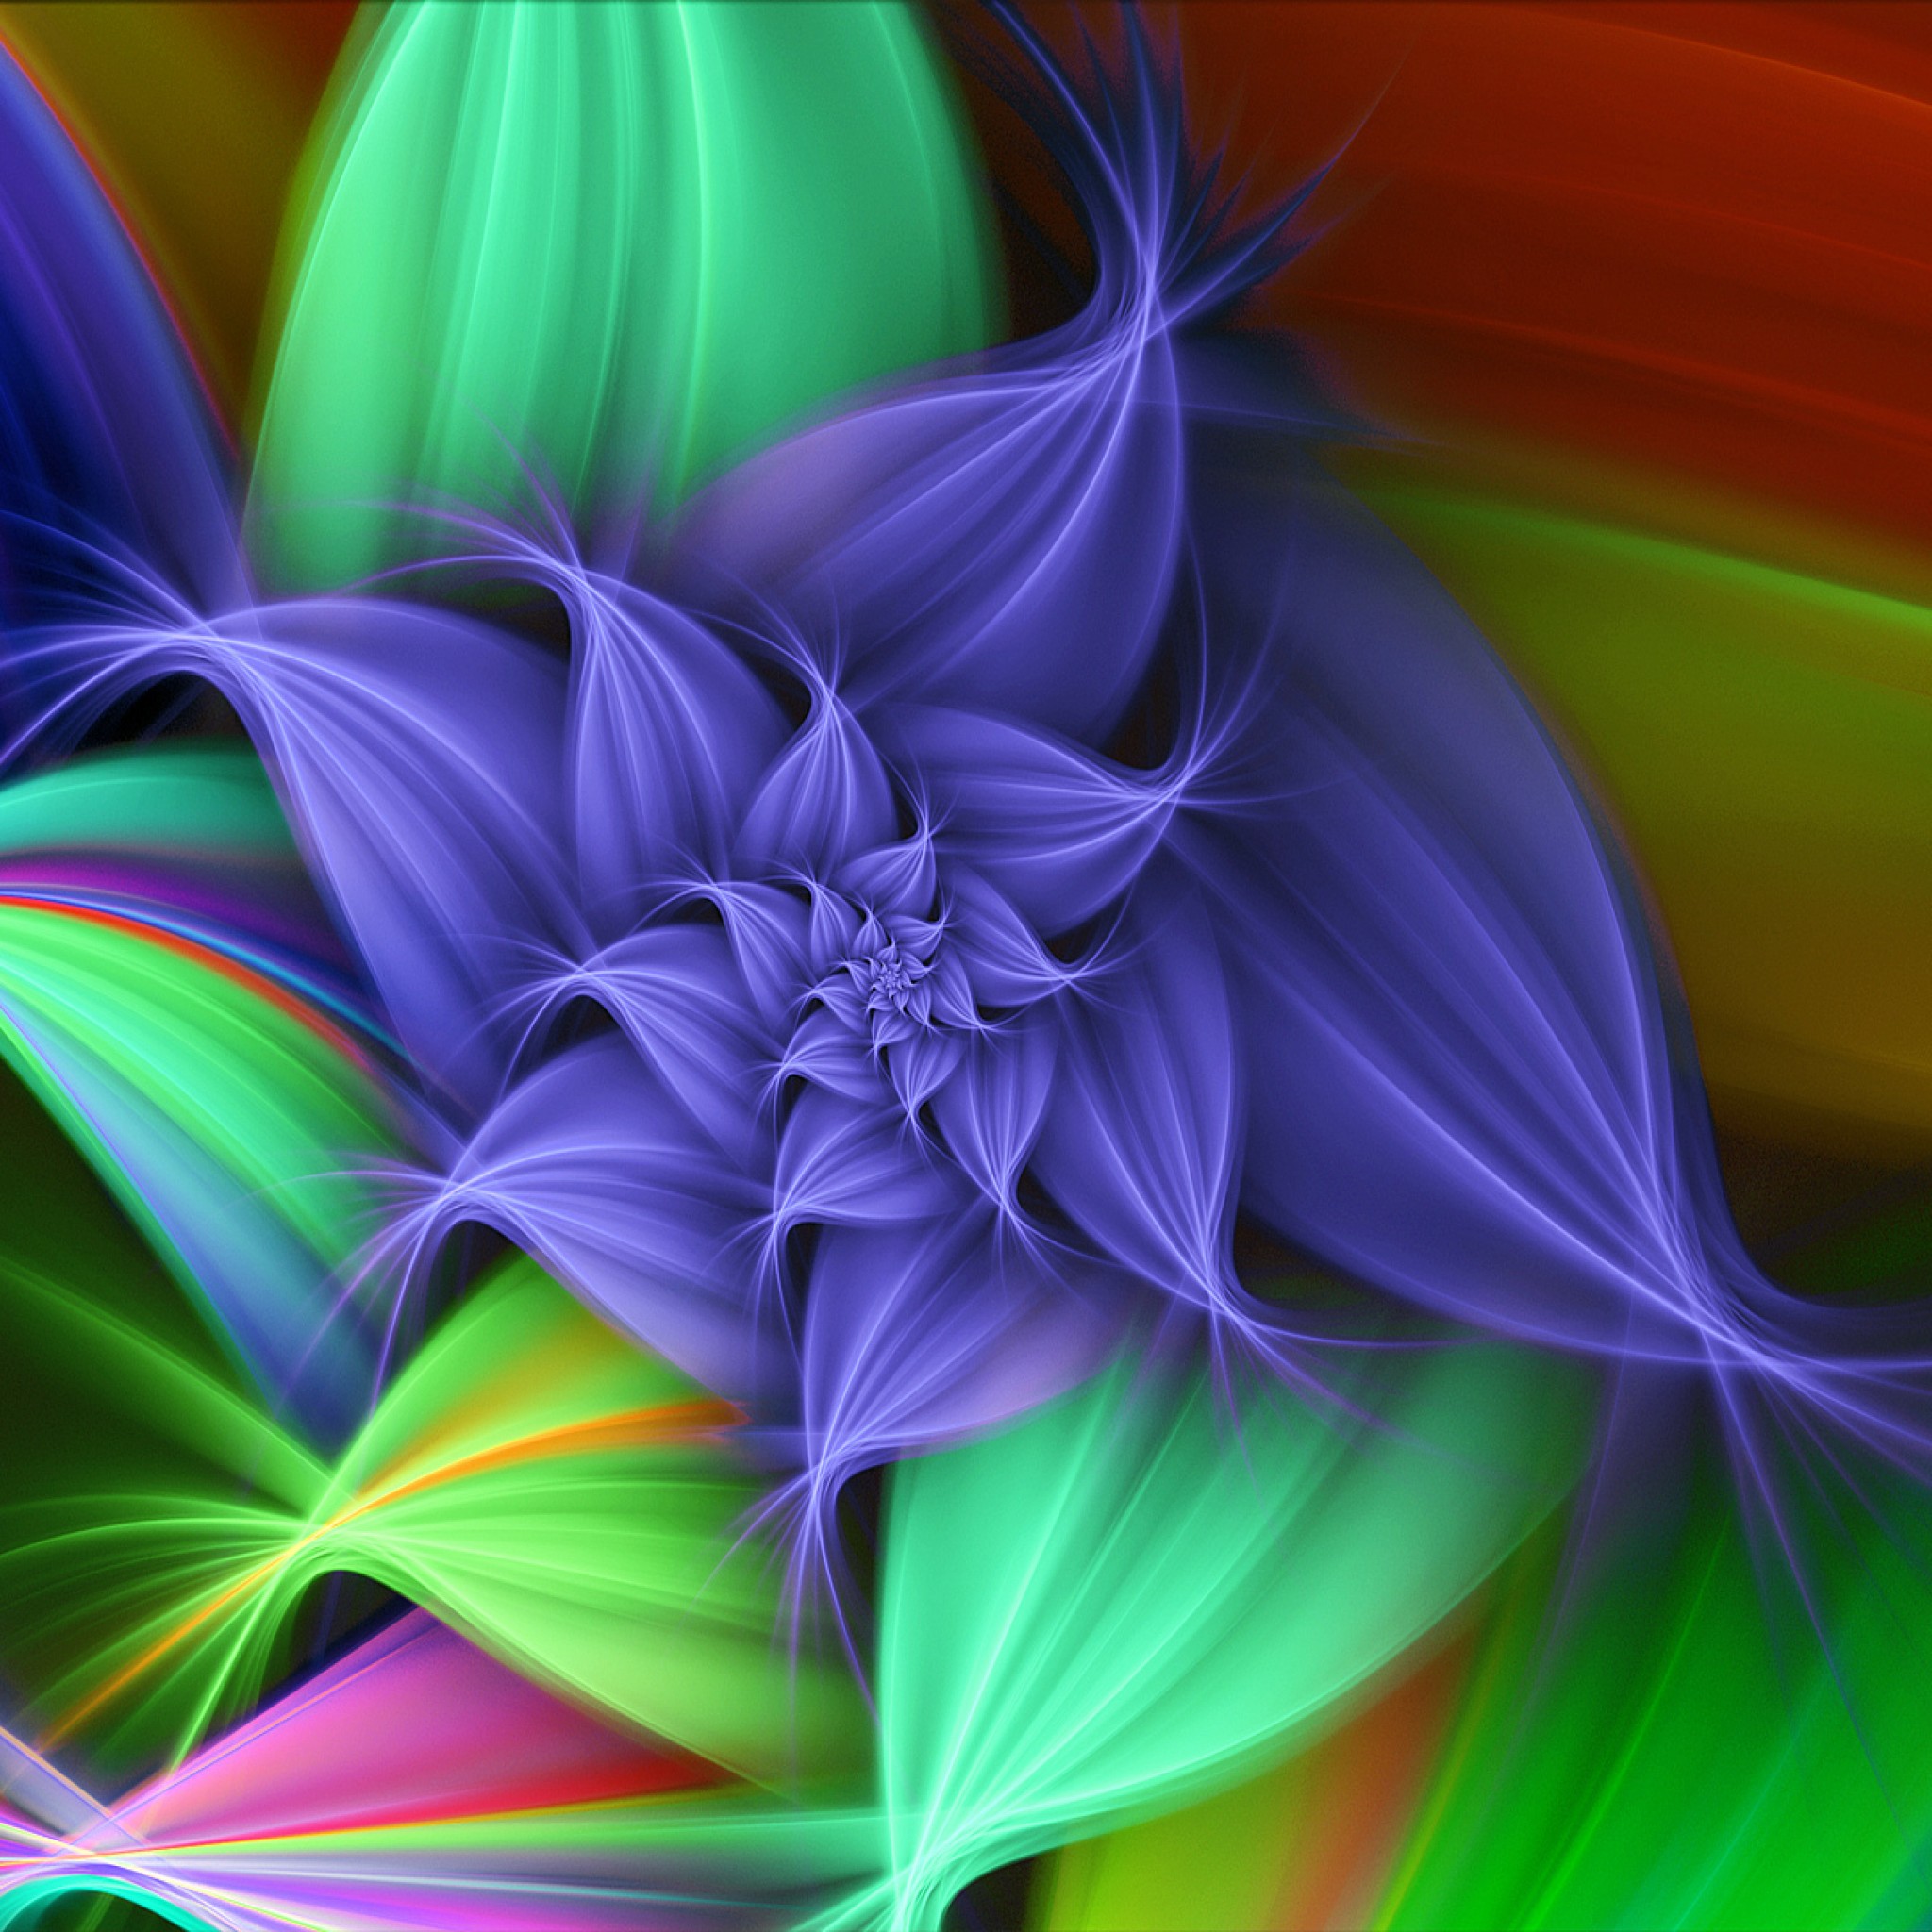 Wallpaper 3d Flower Graphics Hd Wallpapers Ipad タブレット壁紙ギャラリー